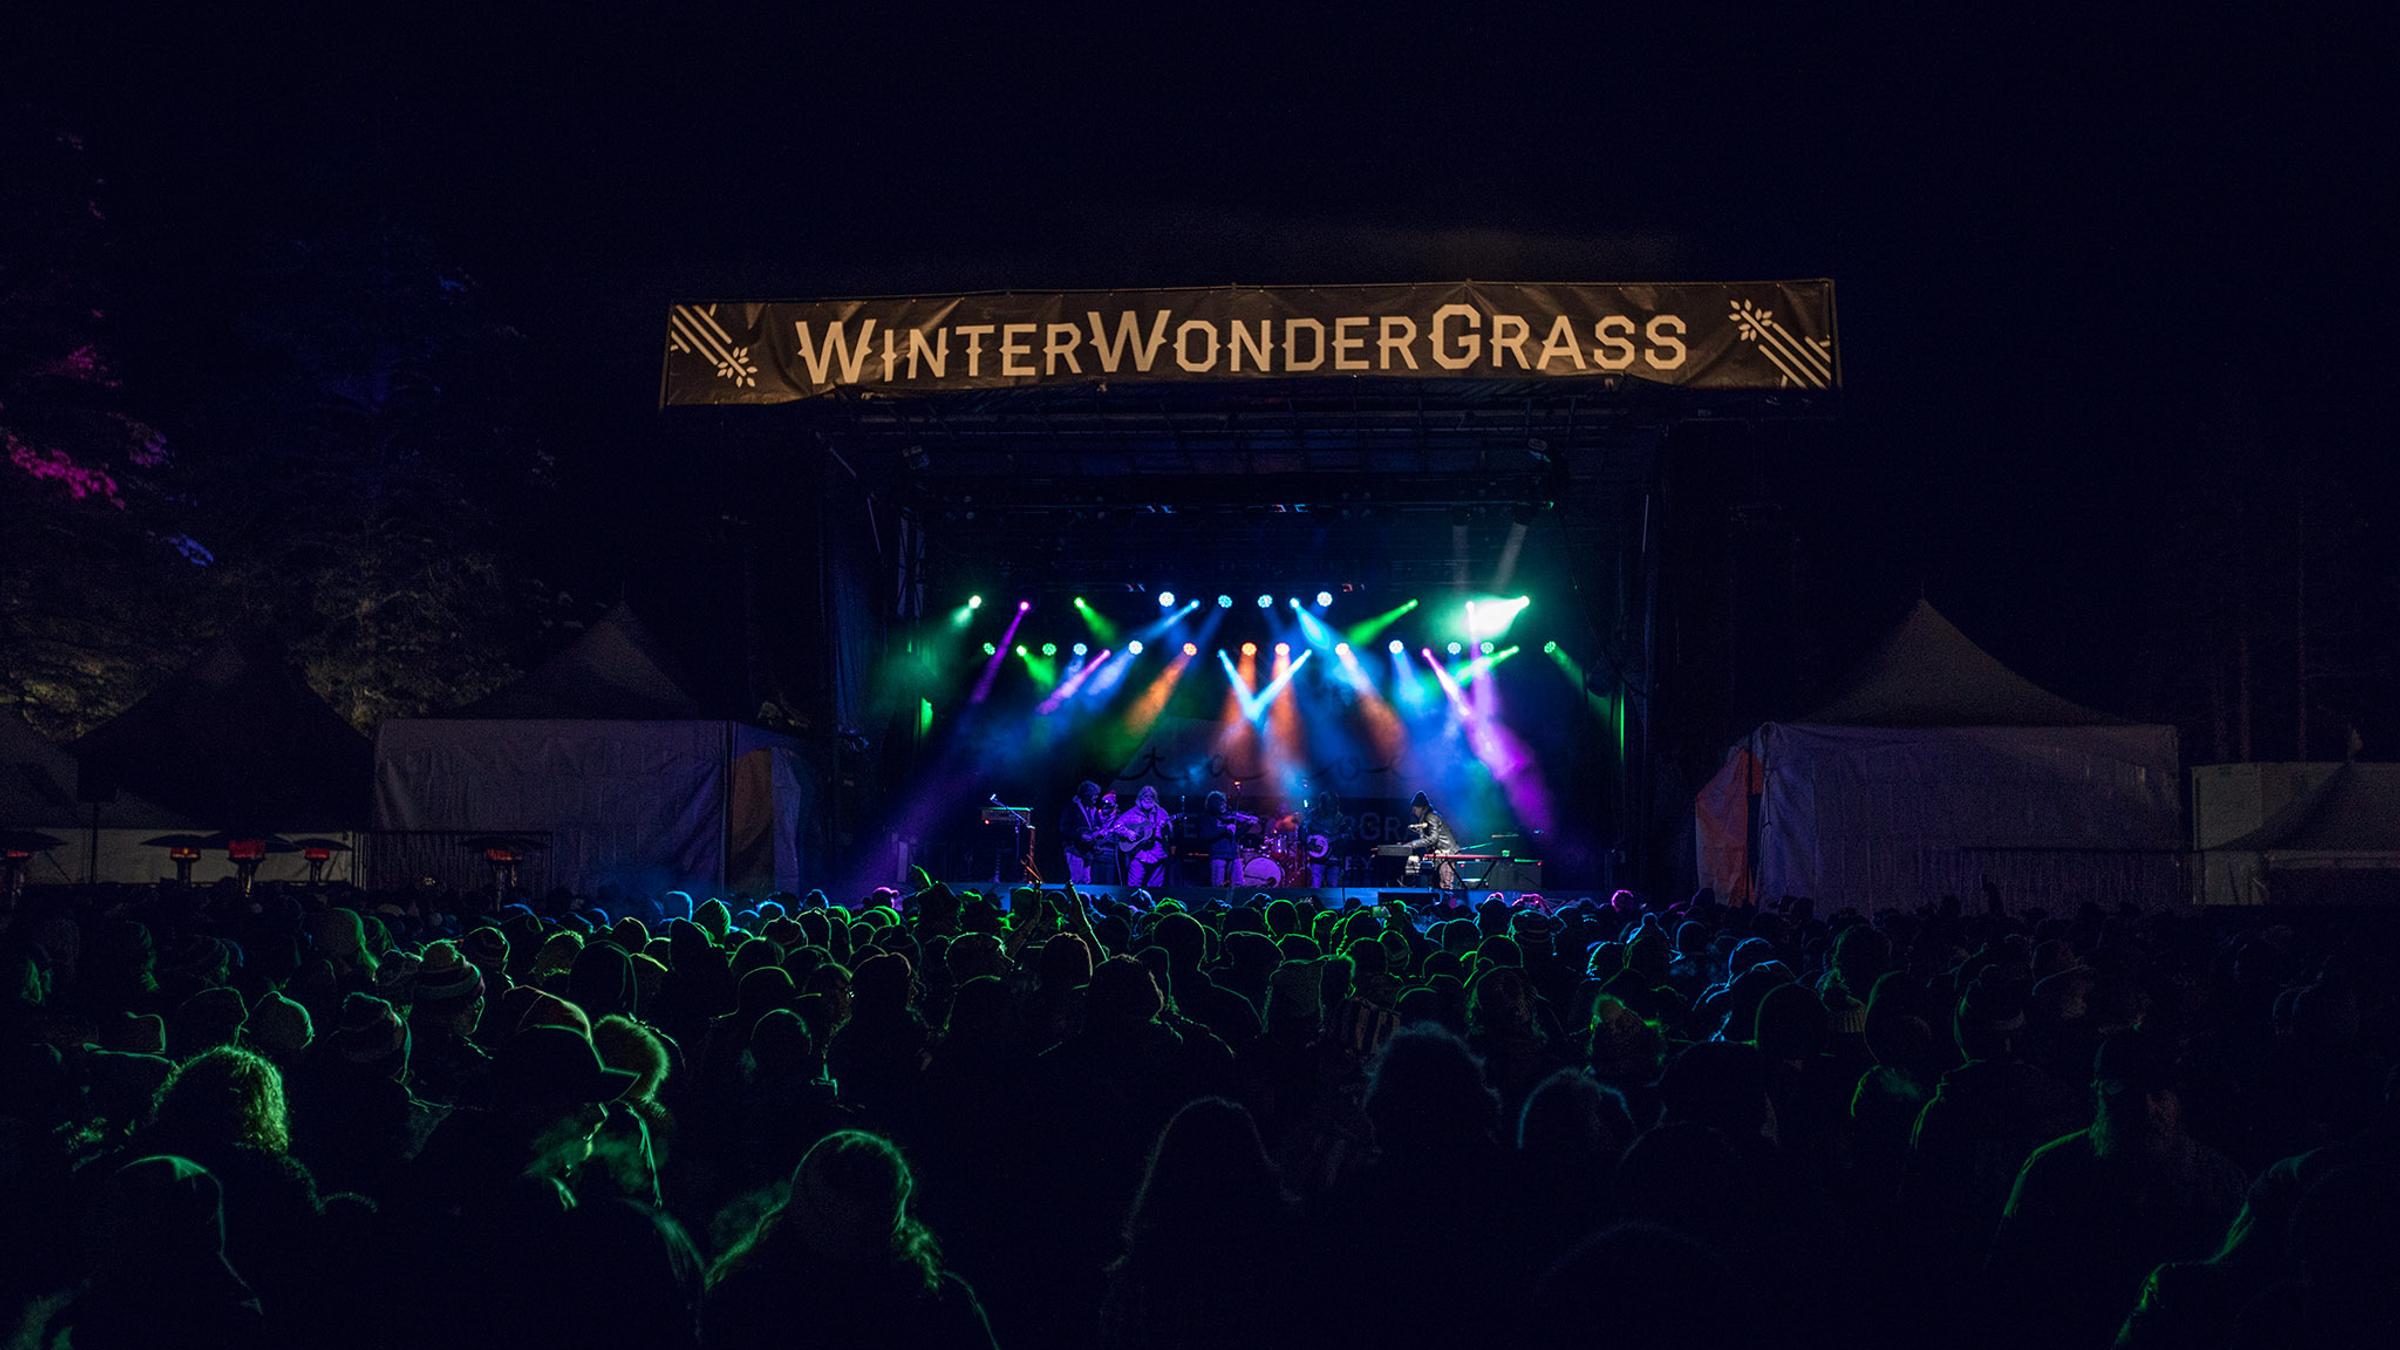 A view of the WinterWonderGrass stage from the Squaw Valley base area.